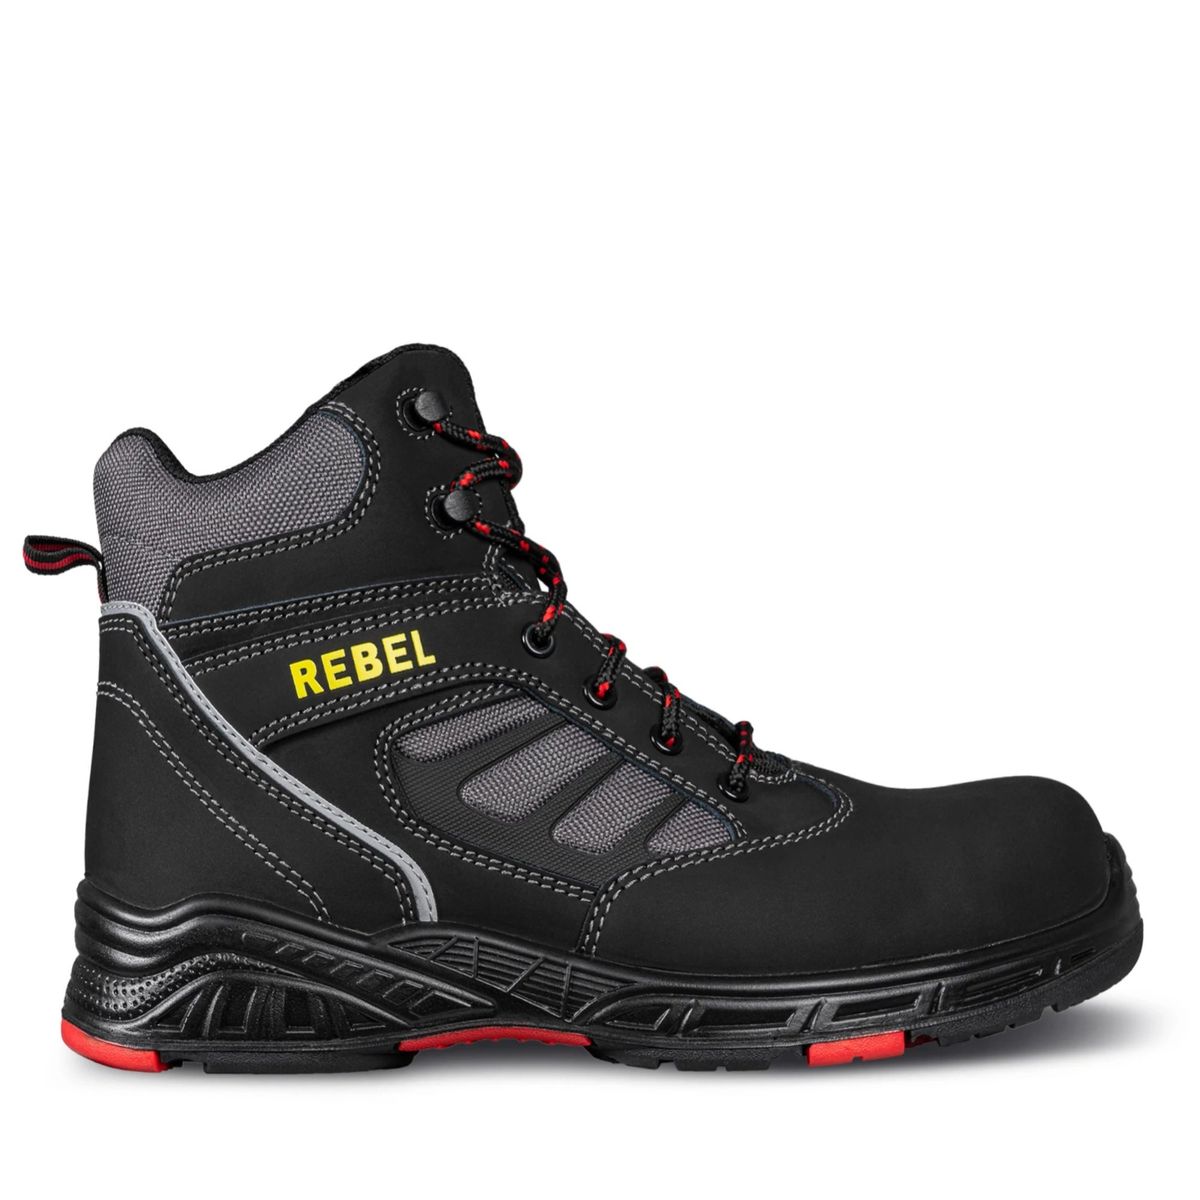 REBEL S3 Apex Non-Metallic Safety Boot | Shop Today. Get it Tomorrow ...